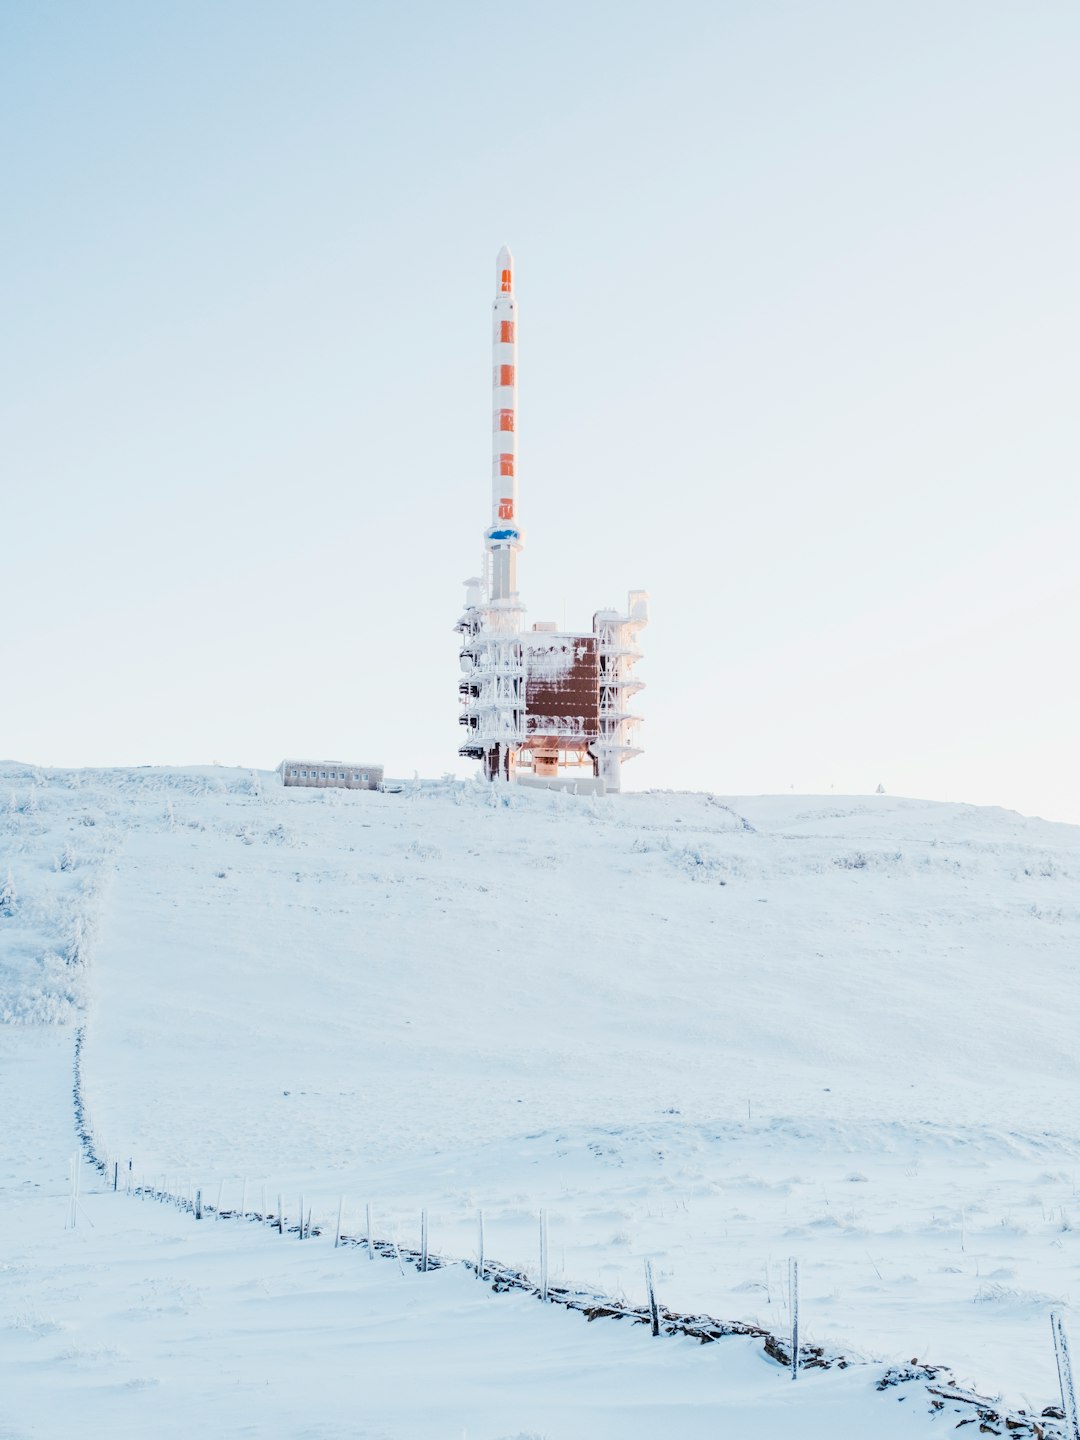 white and orange tower on white snow covered ground